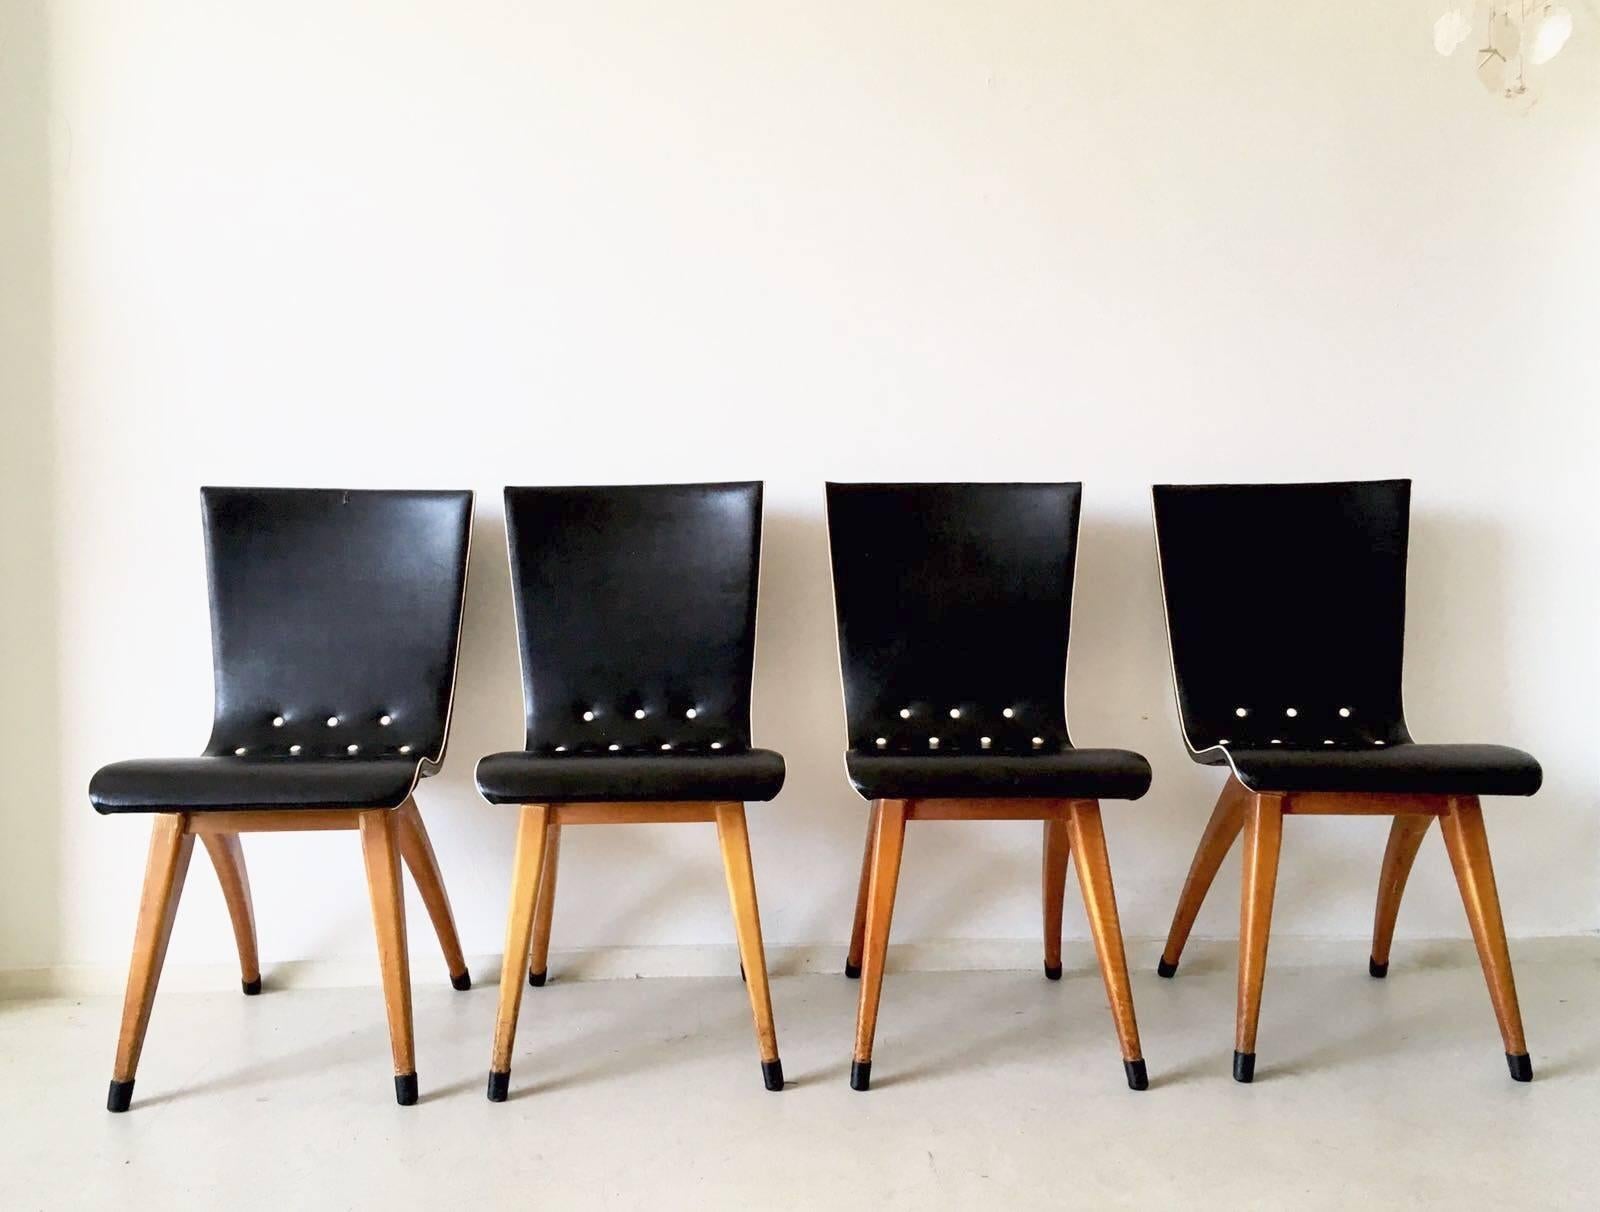 This set of four black beautiful chairs were designed and manufactured in the Netherlands, circa 1950s. They feature frames in wood (asumed to be fruitwood) and original black and white leatherette upholstery. Wonderfully finished with original